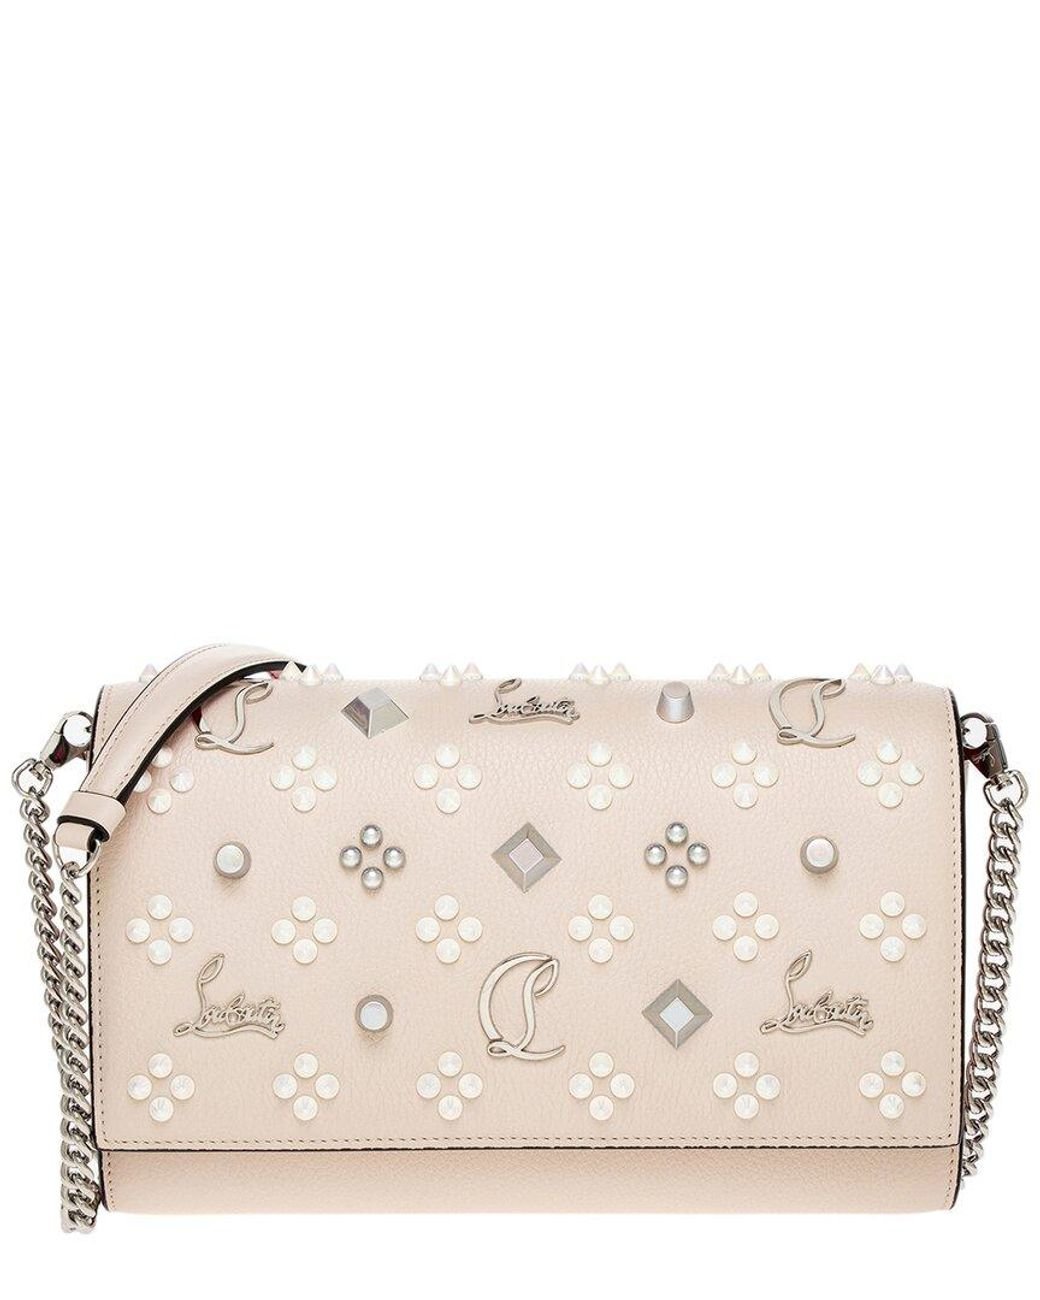 Beige Paloma small leather clutch bag, Christian Louboutin